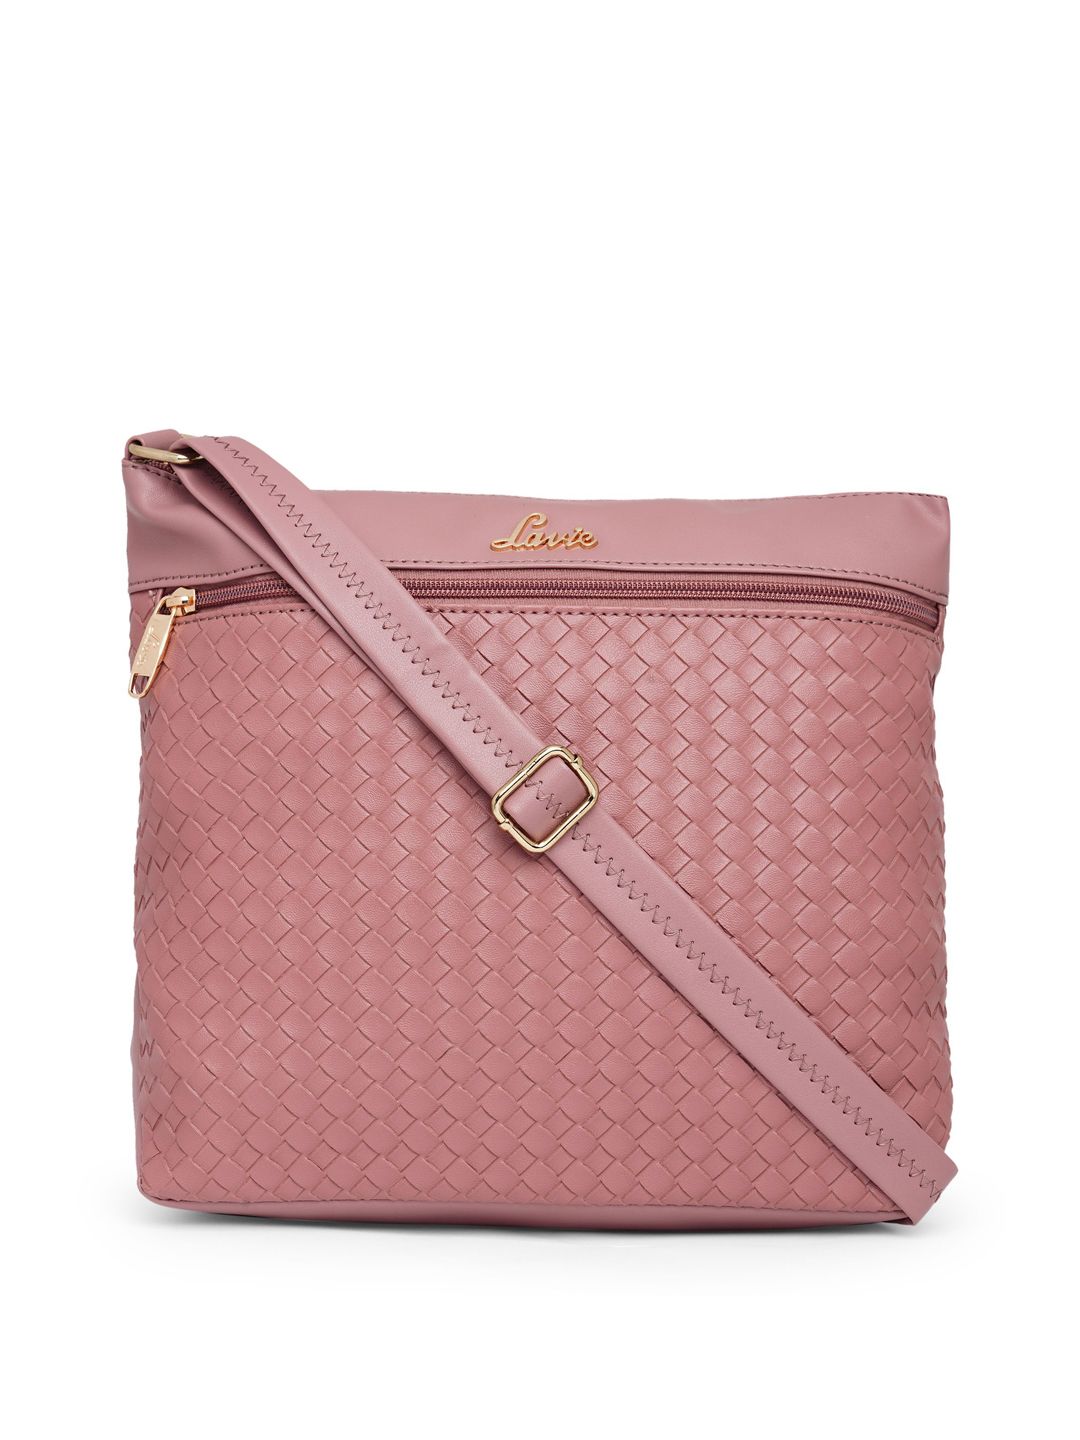 Lavie Pink Textured Structured Sling Bag Price in India